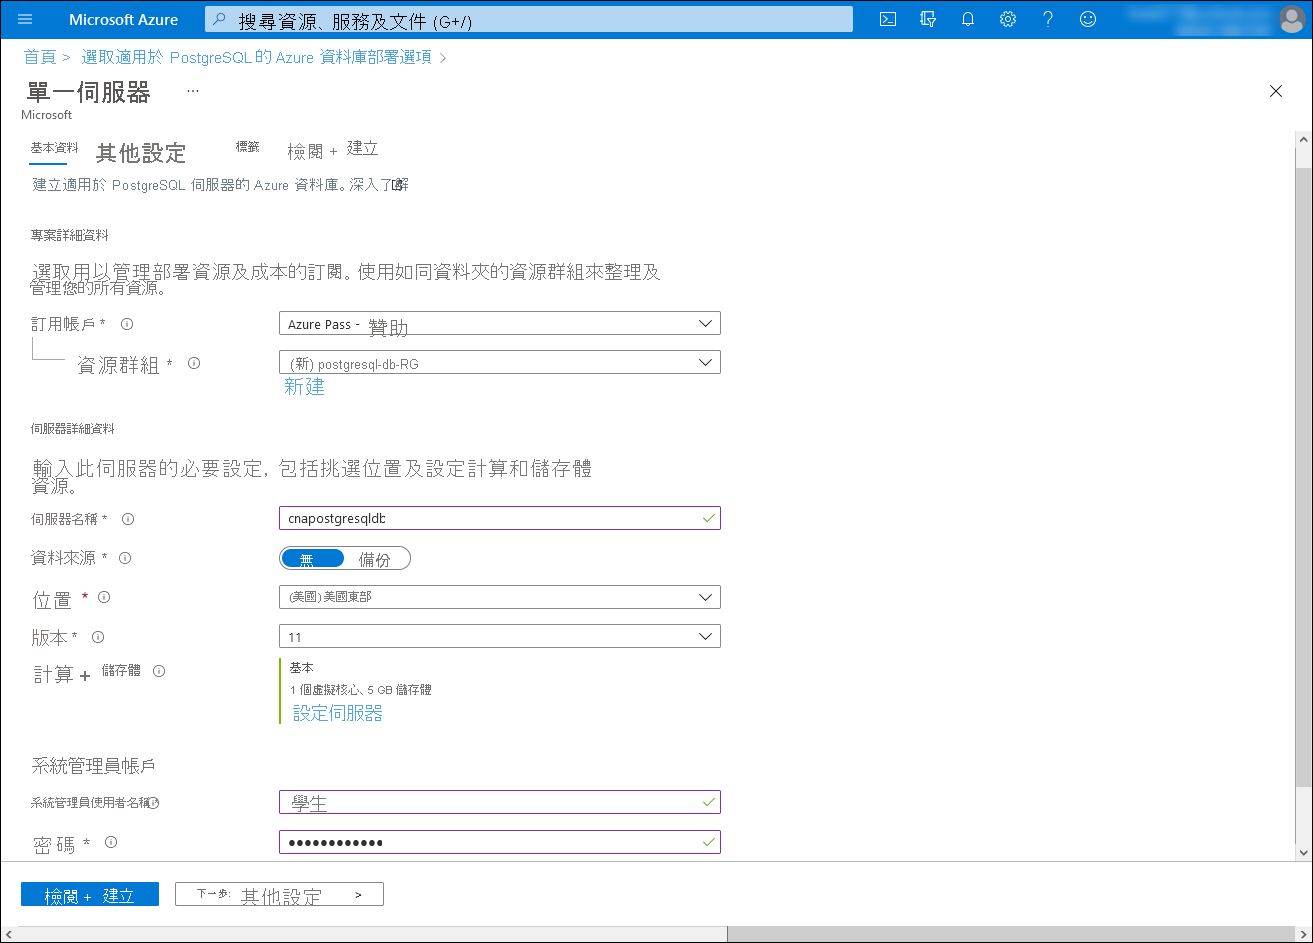 Screenshot of the Basics tab of the server blade in the Azure portal.